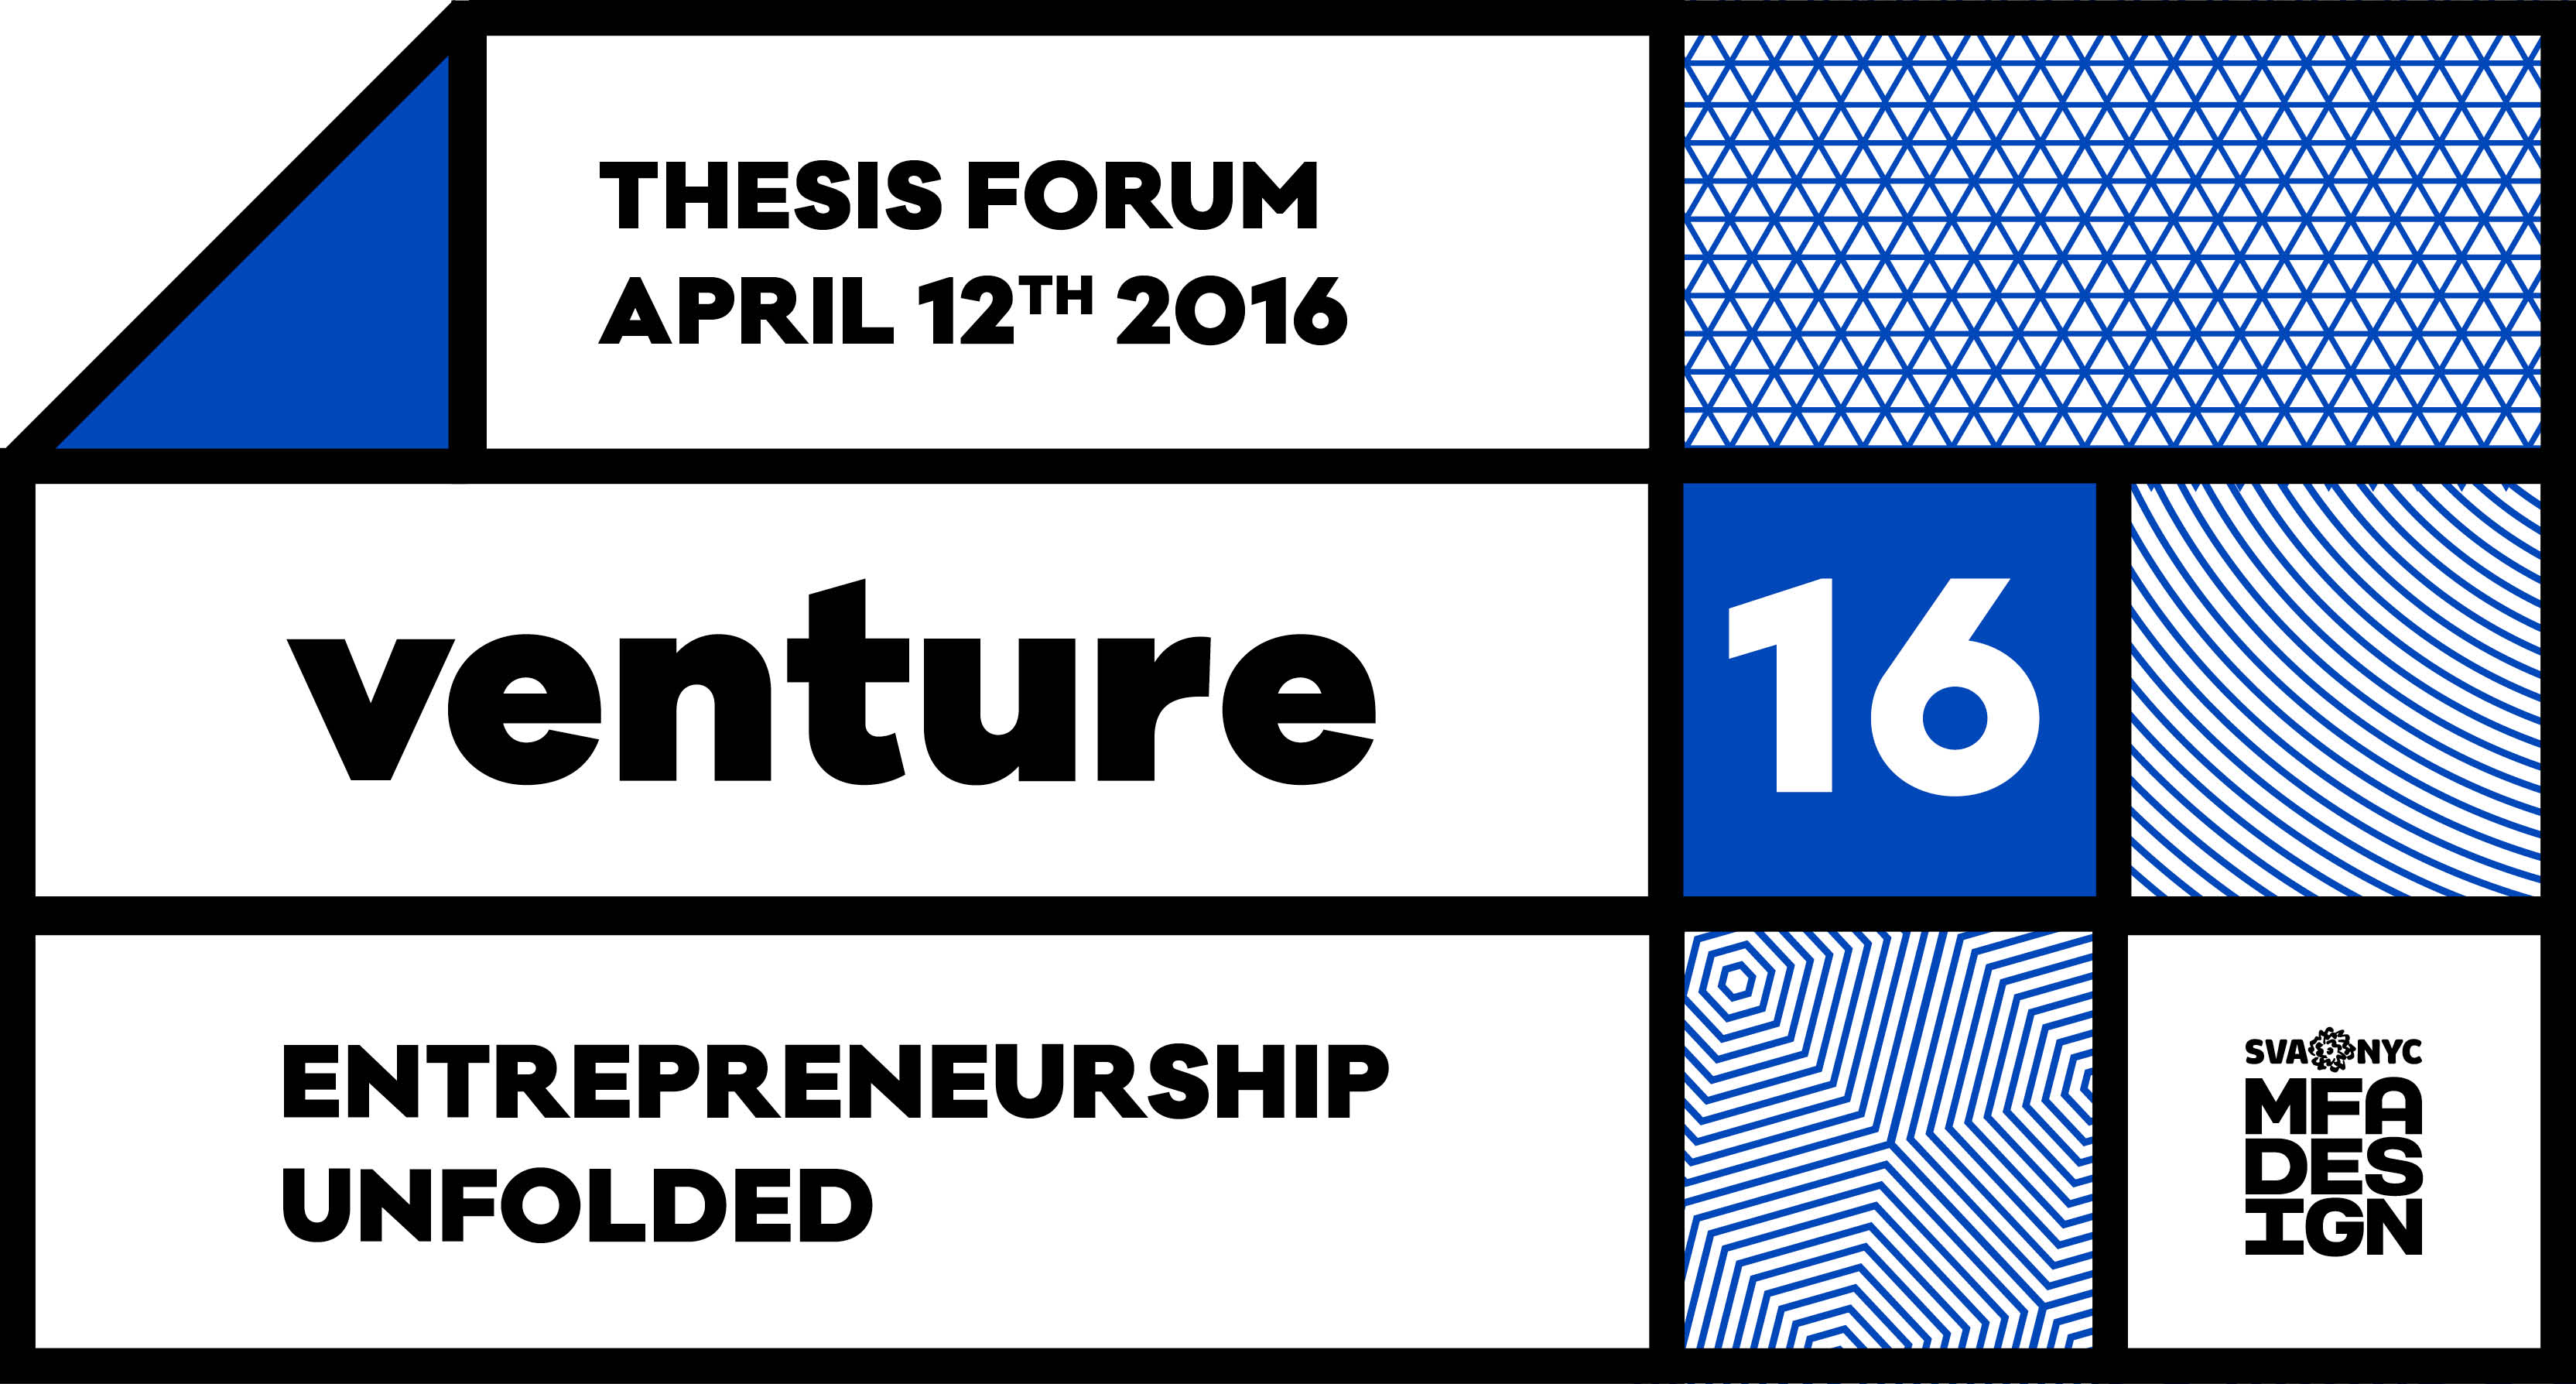 A white poster with some squares and triangles with blue patterns. The text on it is: Thesis Forum. Venture 16. Entrepreneurship Unfolded. MFA Design Logo.